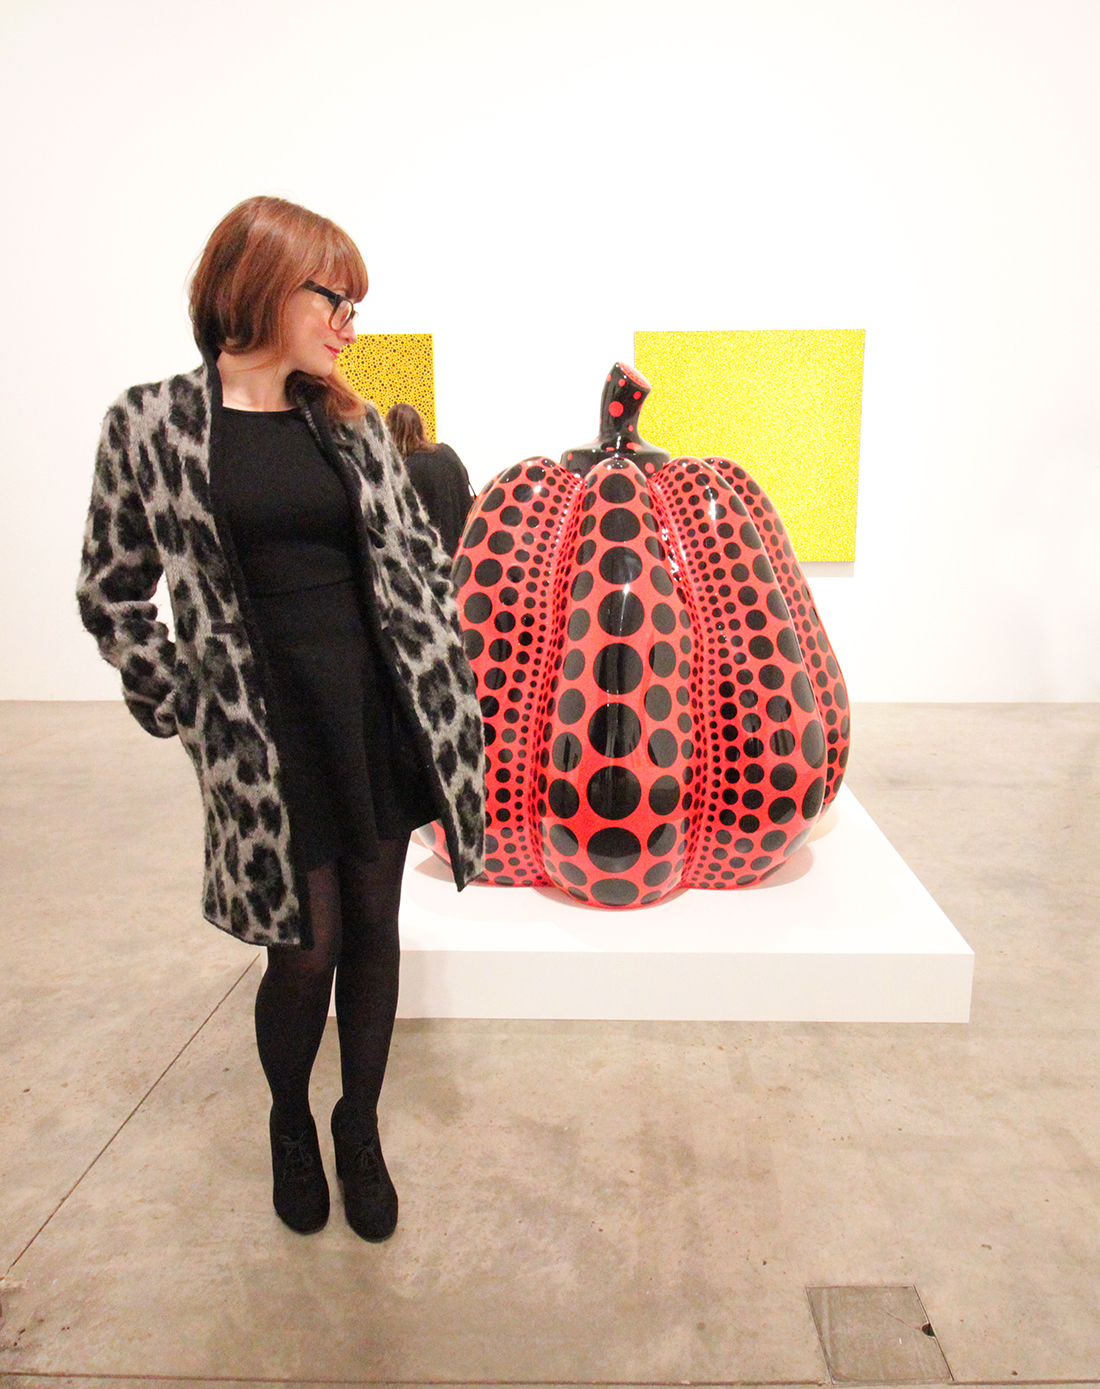 The Yayoi Kusama exhibition at the Victoria Miro gallery in London 2018